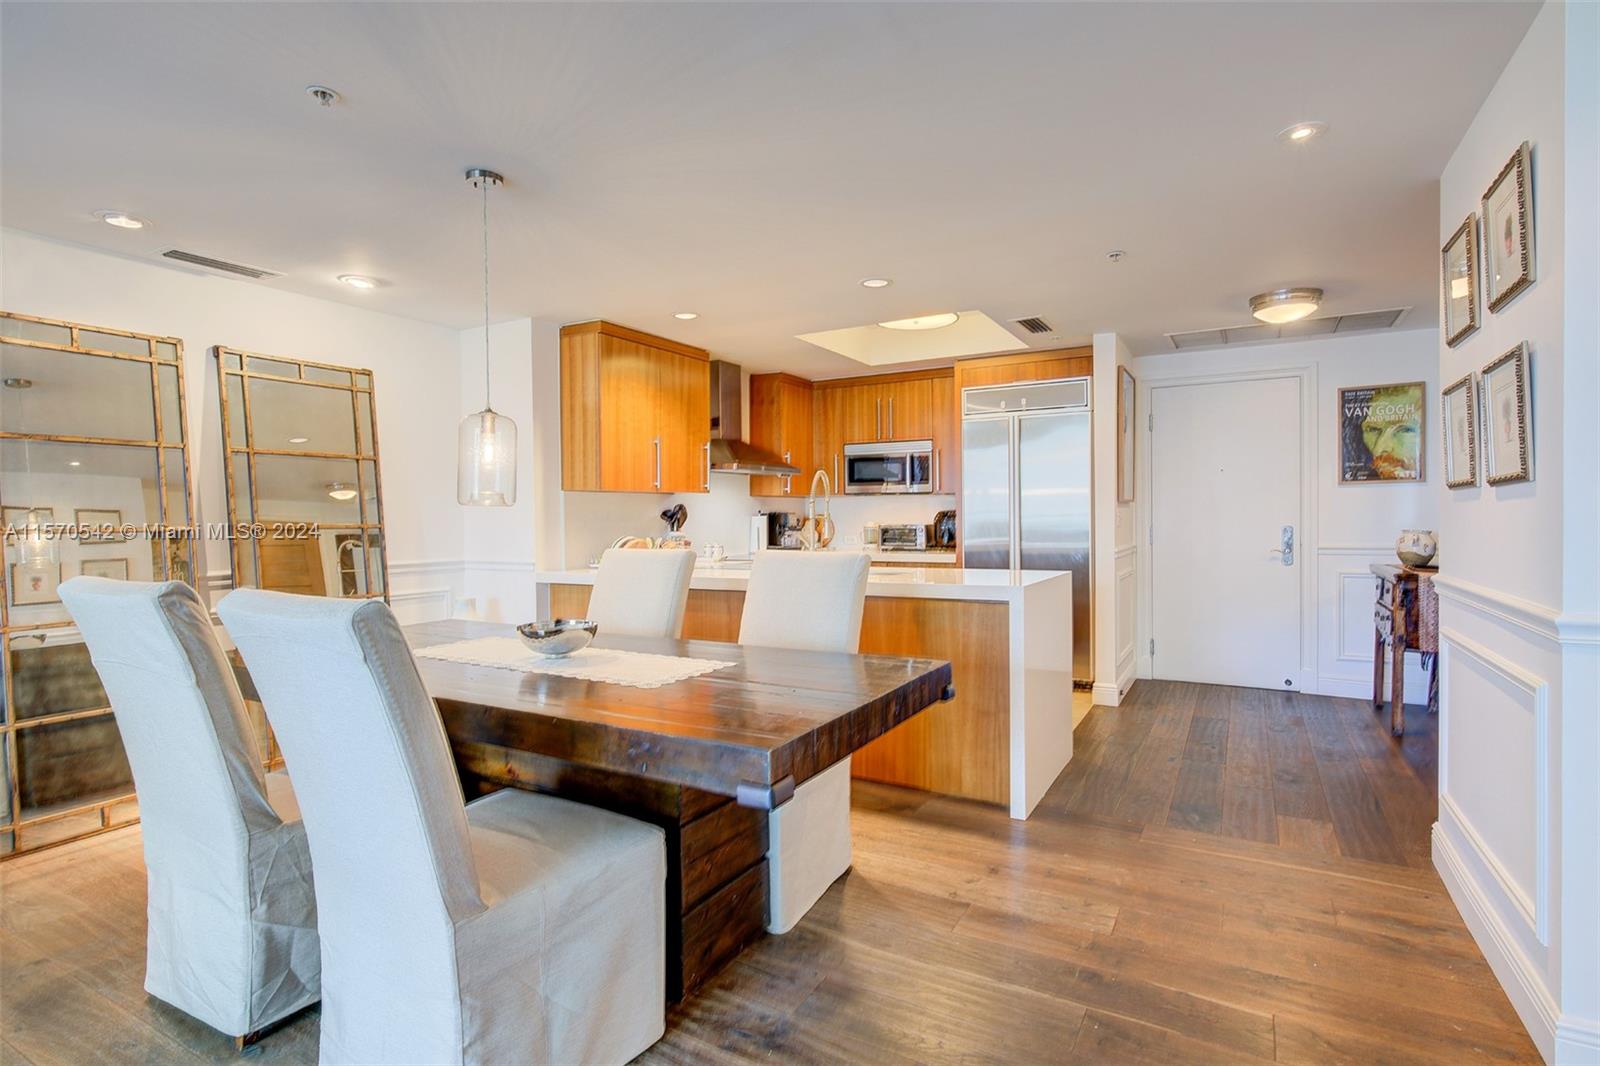 a kitchen with stainless steel appliances granite countertop a table chairs sink refrigerator and cabinets